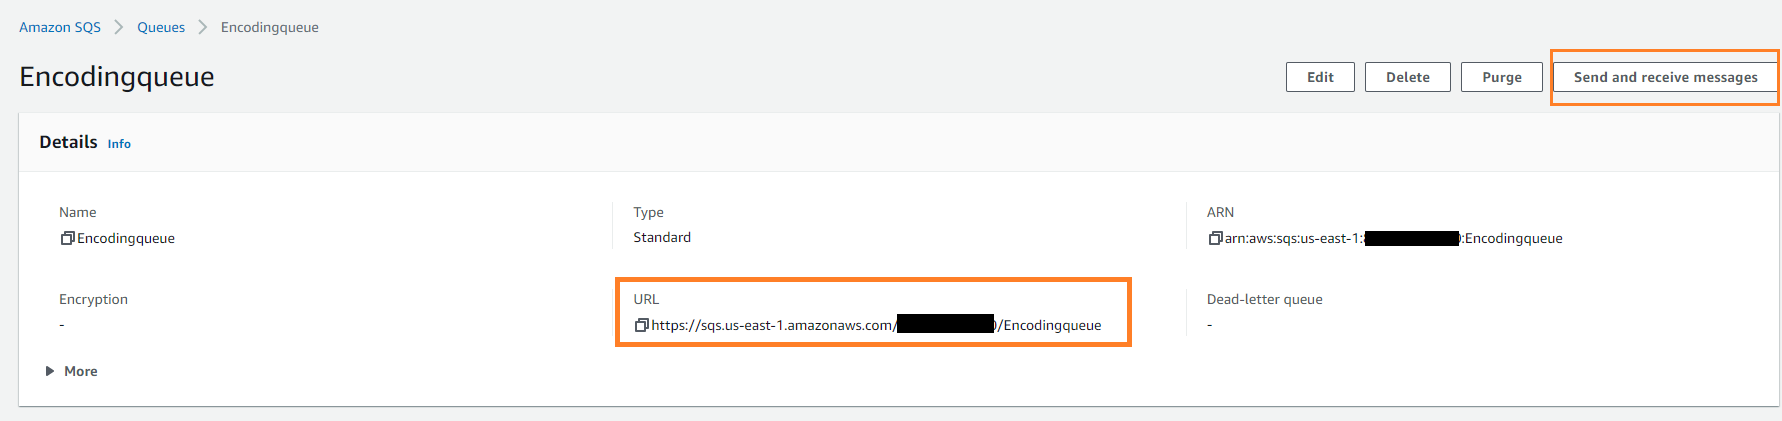 amazon sqs send and recieve messages